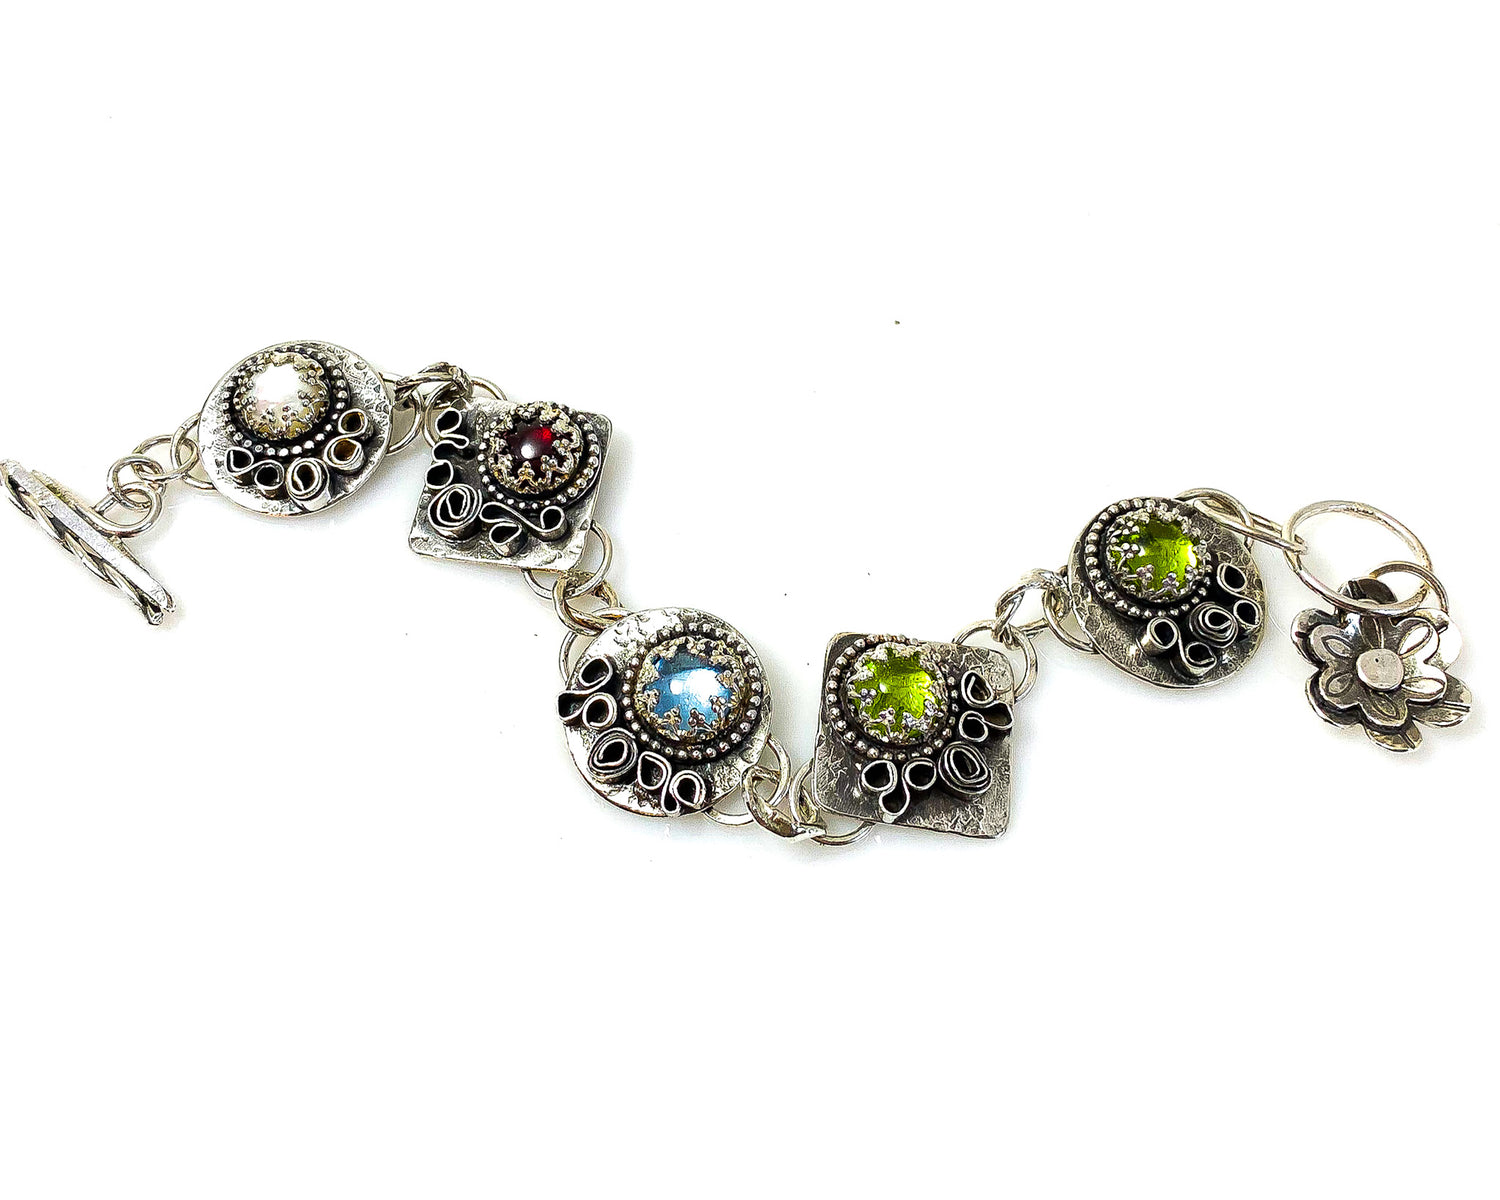 Swiss Blue Topaz, Peridot, Mother of Pearl  Birthstone Bracelet. Sandra Anne Designs, High Quality Handcrafted Jewelry made by a Roycroft Artisan